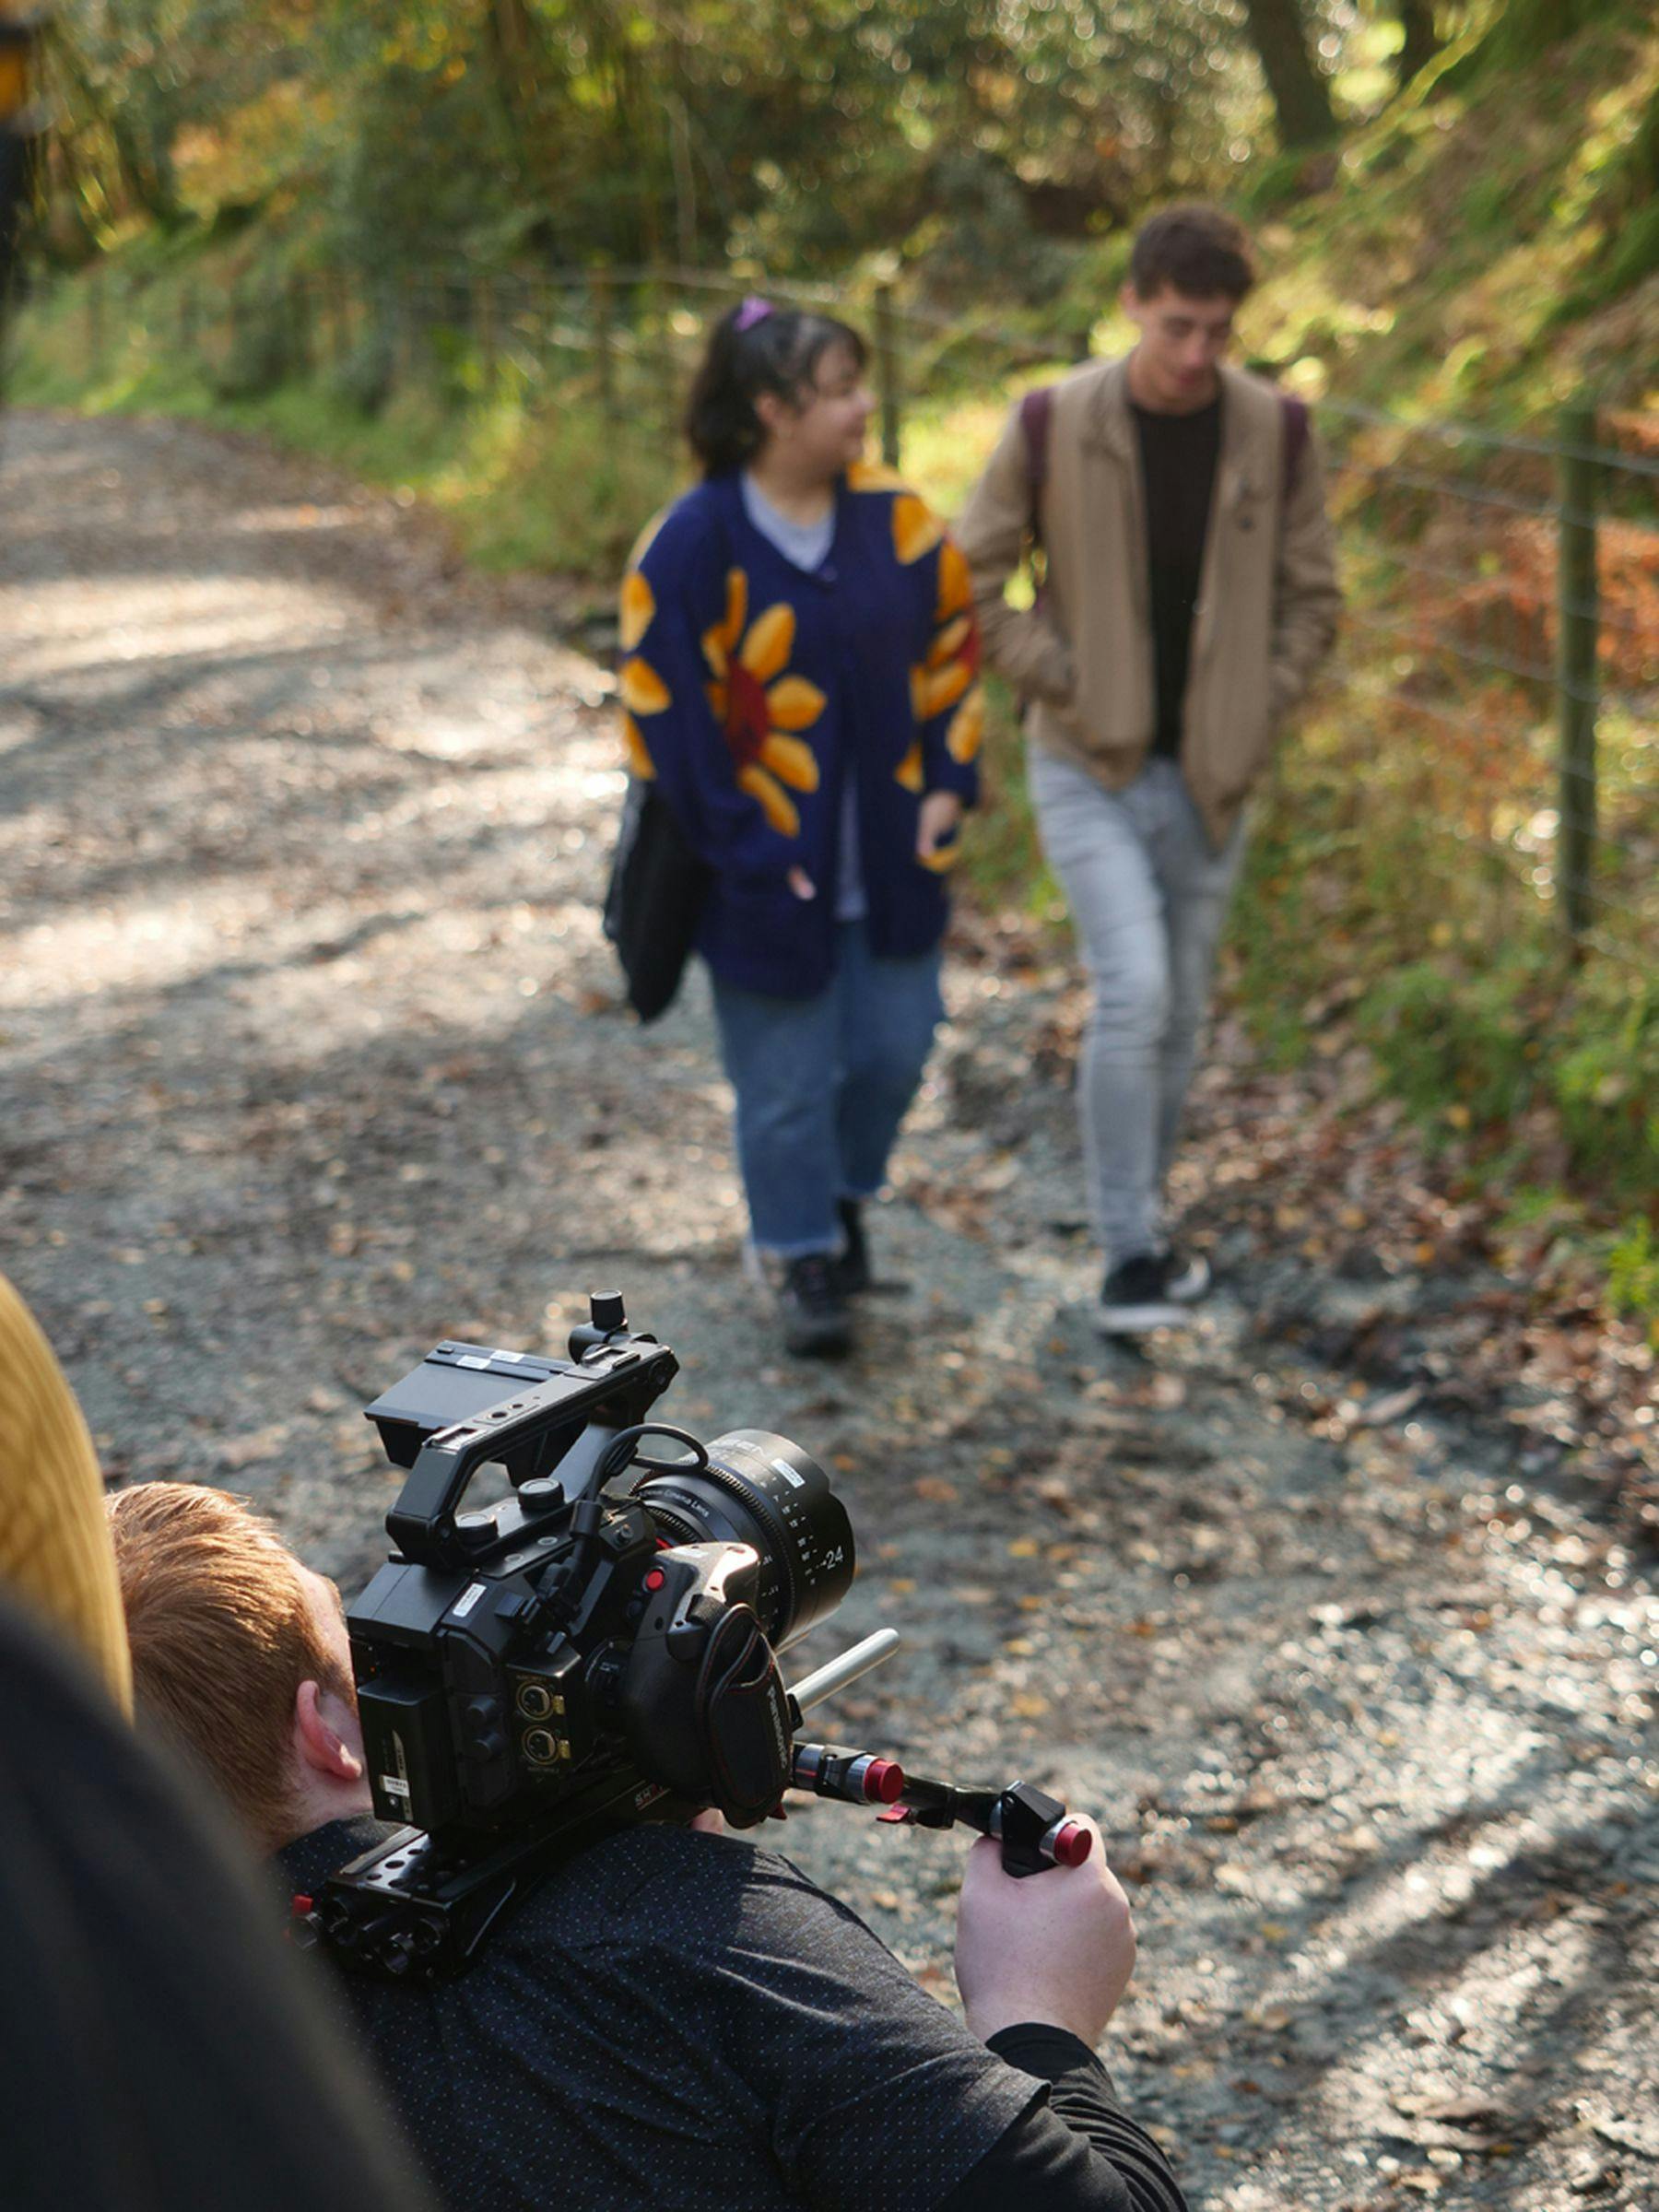 Filming on location